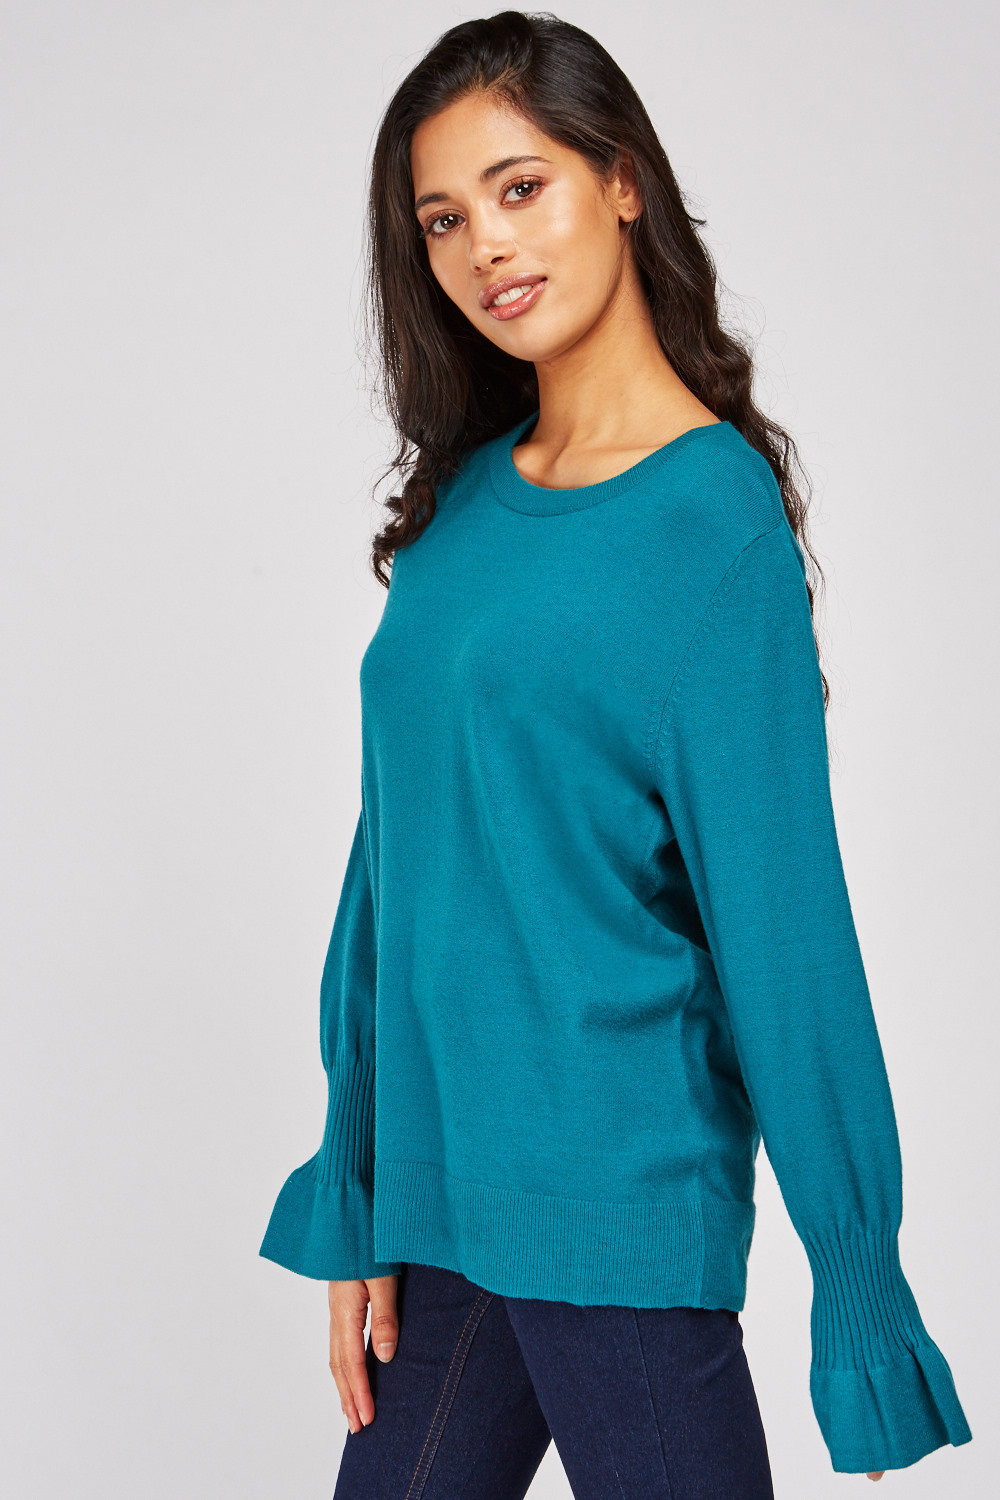 Bell Sleeve Knit Sweater - Just $7